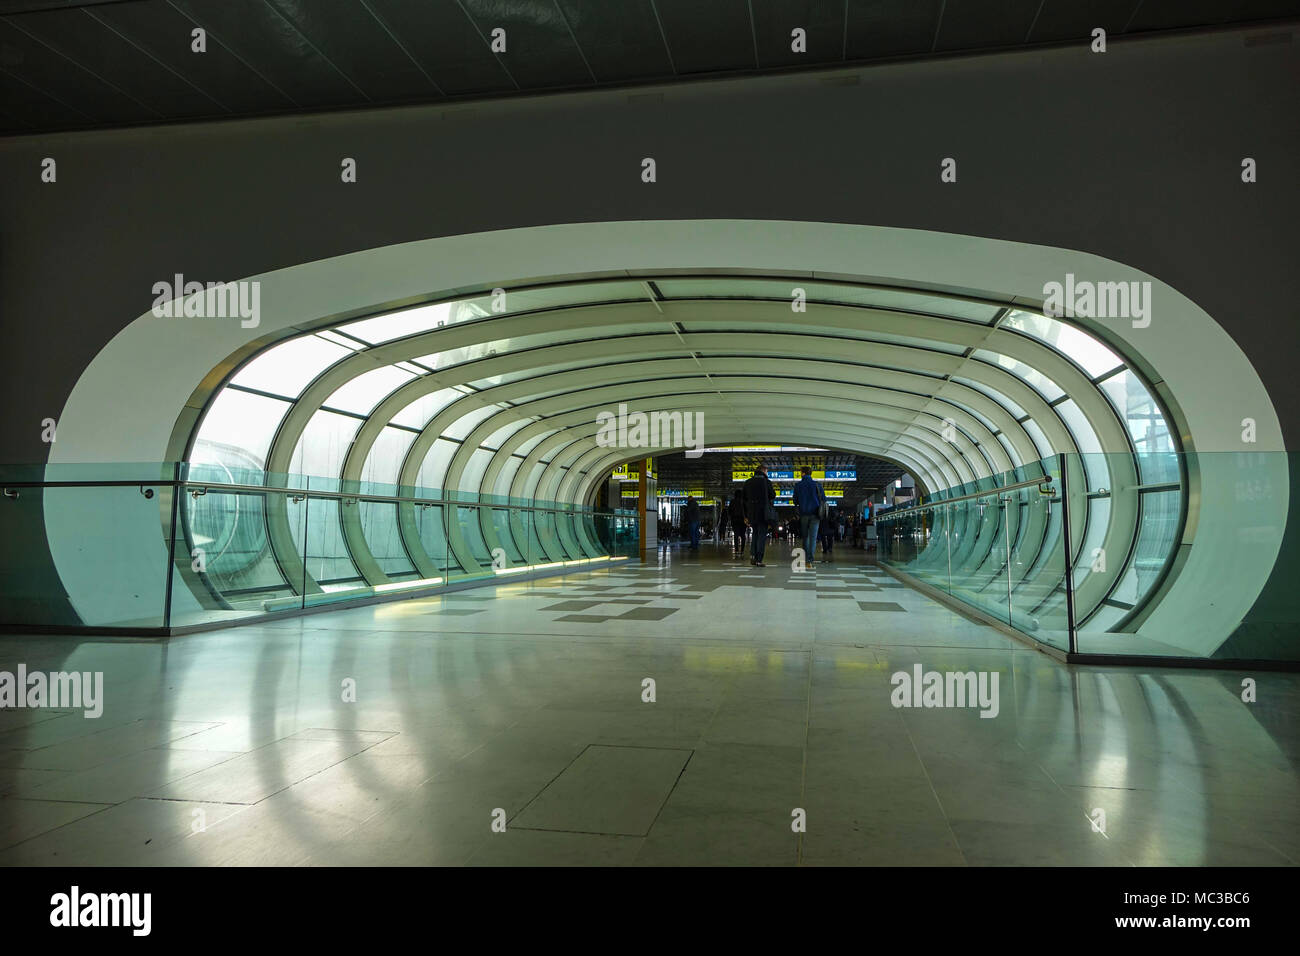 Pedestrian tunnel with people walking through, Toulouse Blagnac airport, France Stock Photo